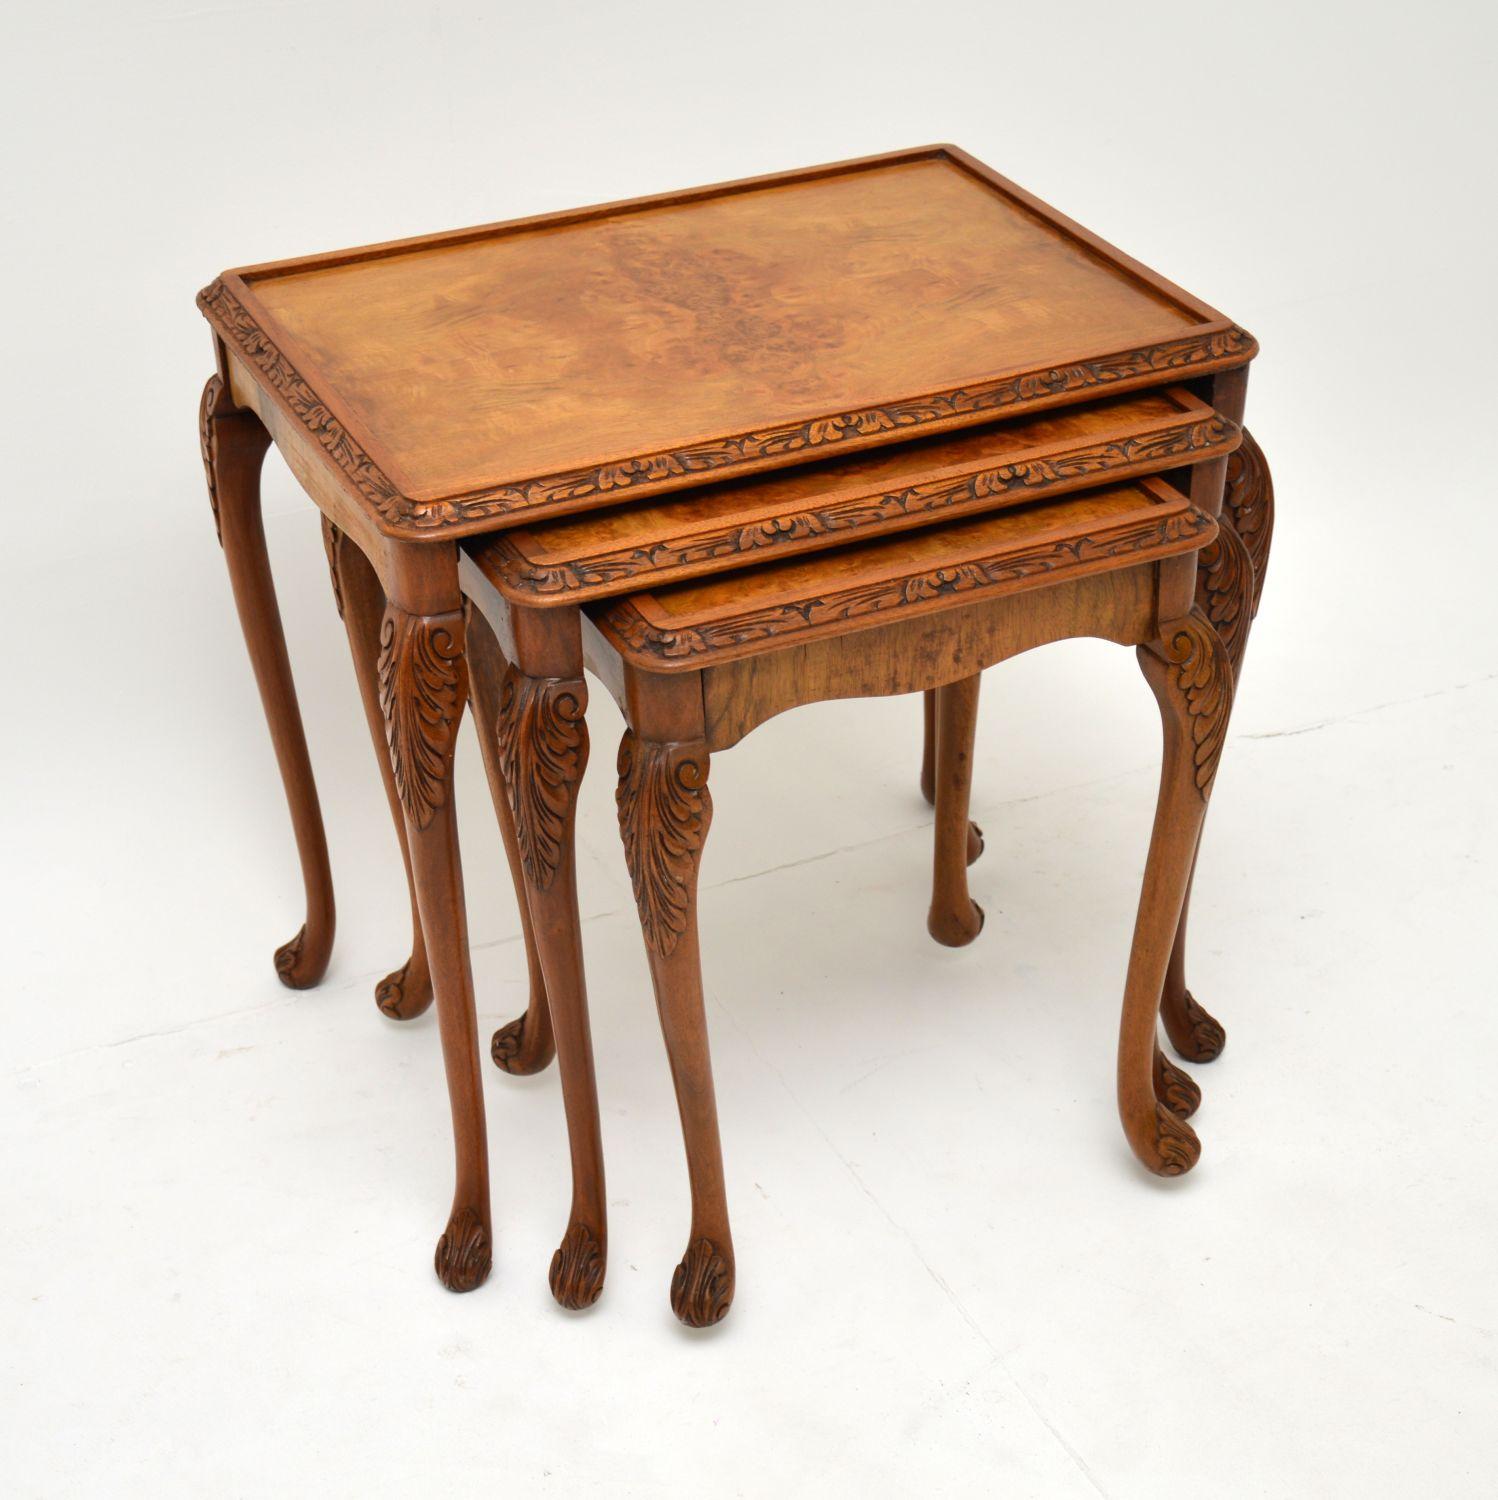 A lovely burr walnut nest of three tables in the antique Queen Anne style. These were made in England, they date from around the 1930’s.

The quality is fantastic, they have good carving on the top edges, legs, feet and have stunning burr walnut